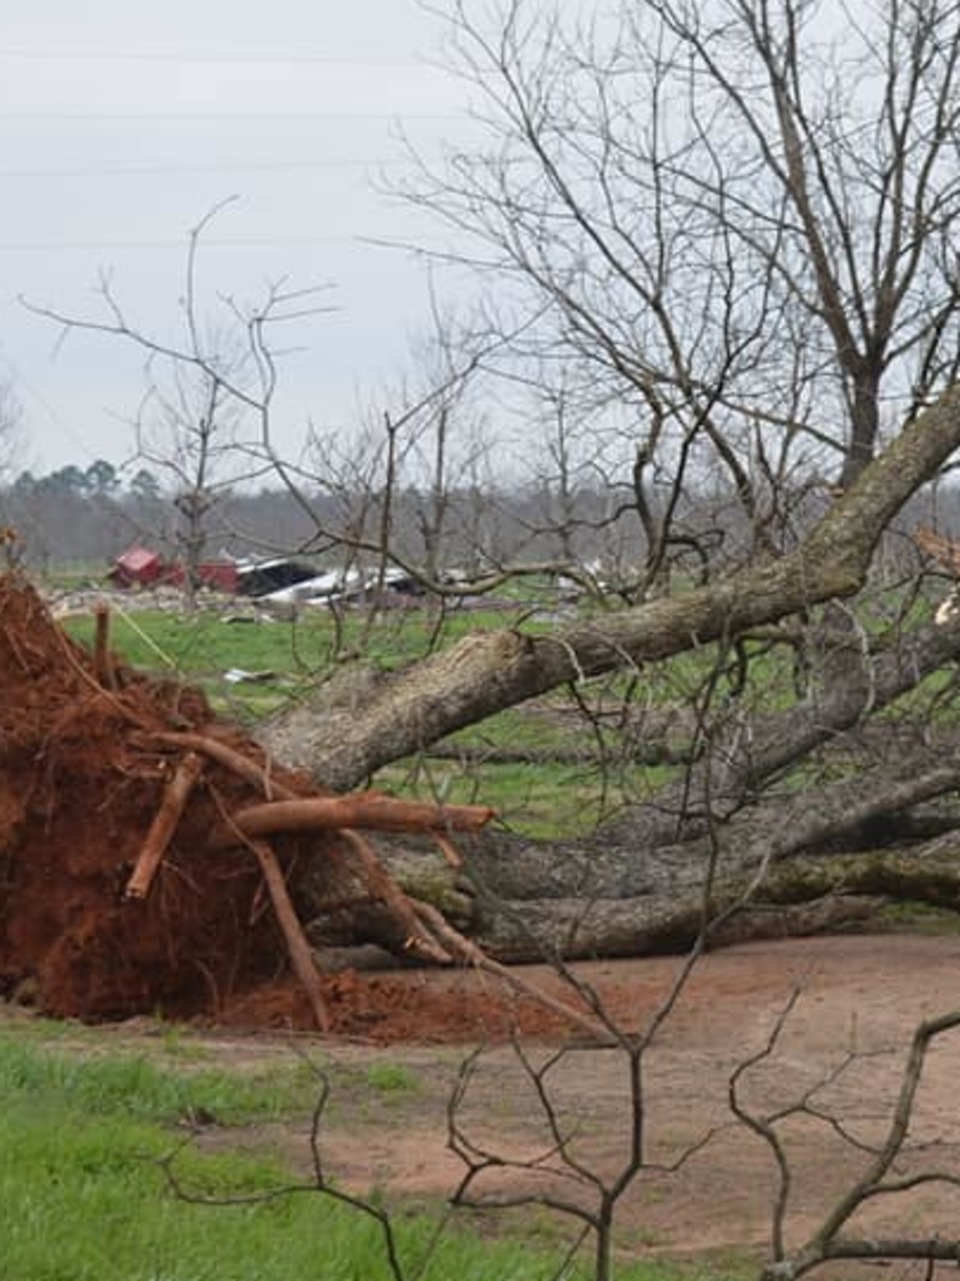 On Seeing My Old Crooked Tree Uprooted After the Tornado